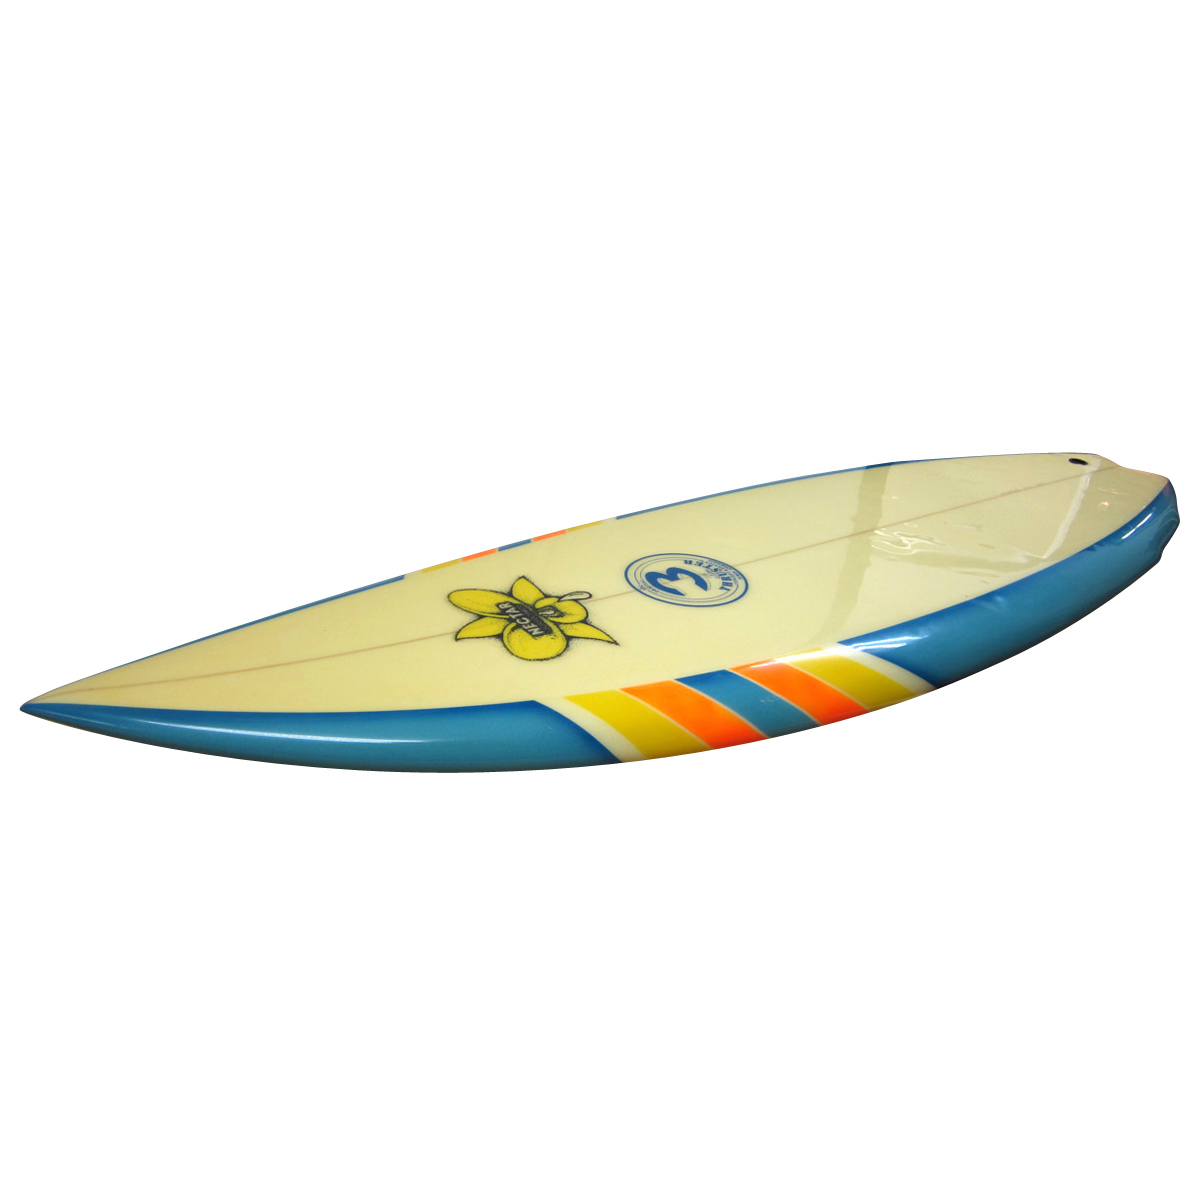 Nectar Surfboards / 5`7 Thruster Vintage Shaped By Gary MacNabb 